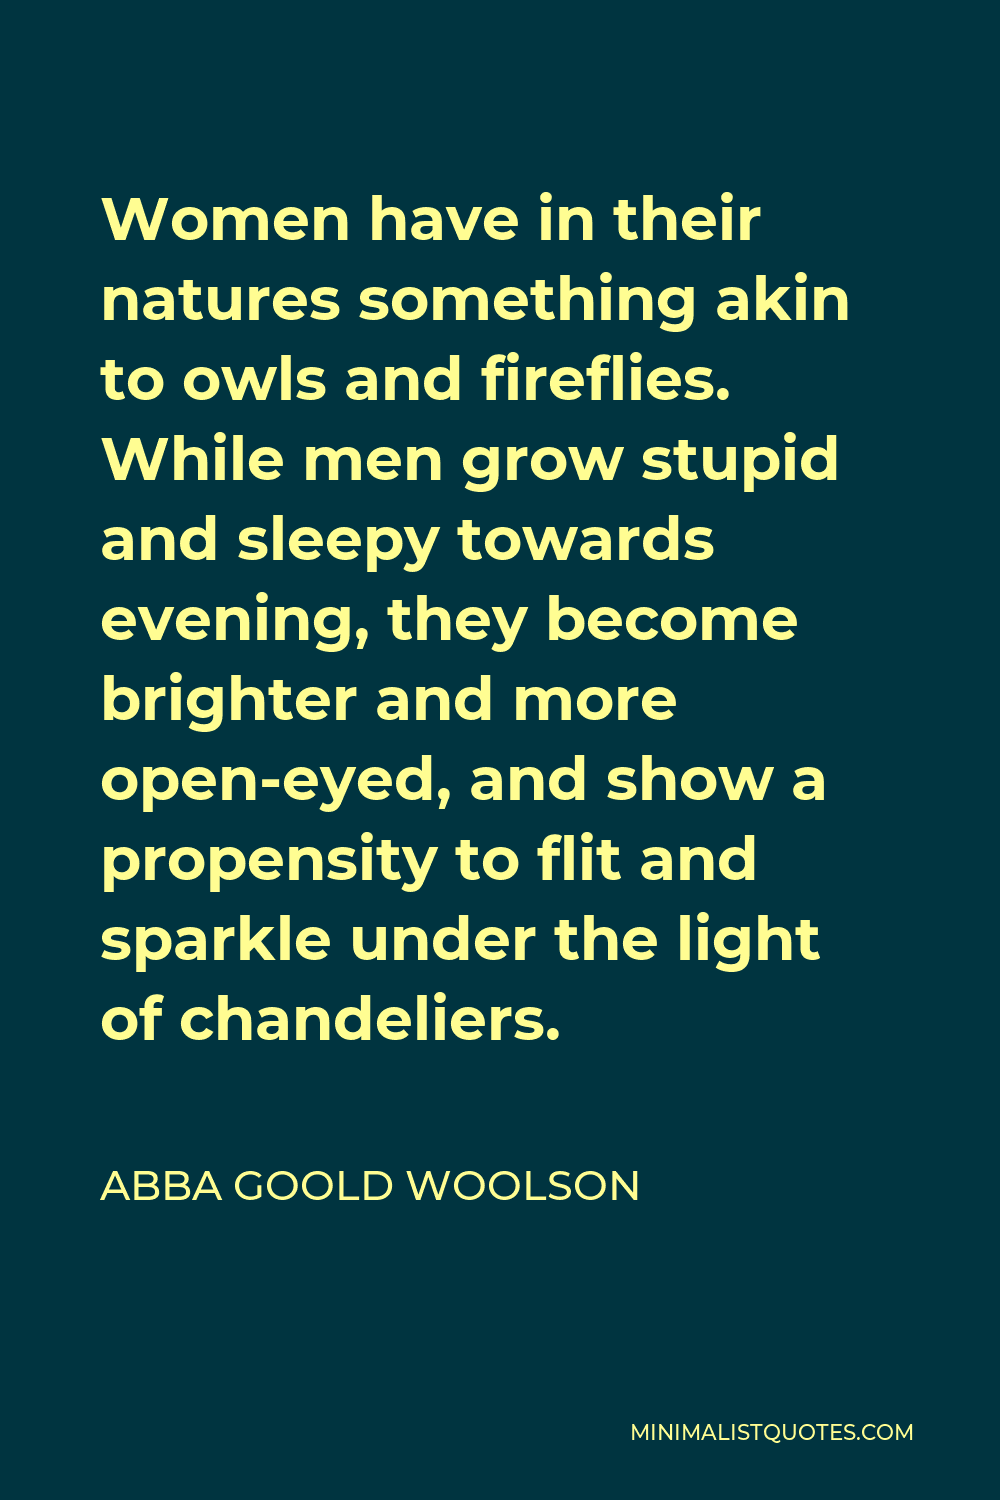 Abba Goold Woolson Quote - Women have in their natures something akin to owls and fireflies. While men grow stupid and sleepy towards evening, they become brighter and more open-eyed, and show a propensity to flit and sparkle under the light of chandeliers.